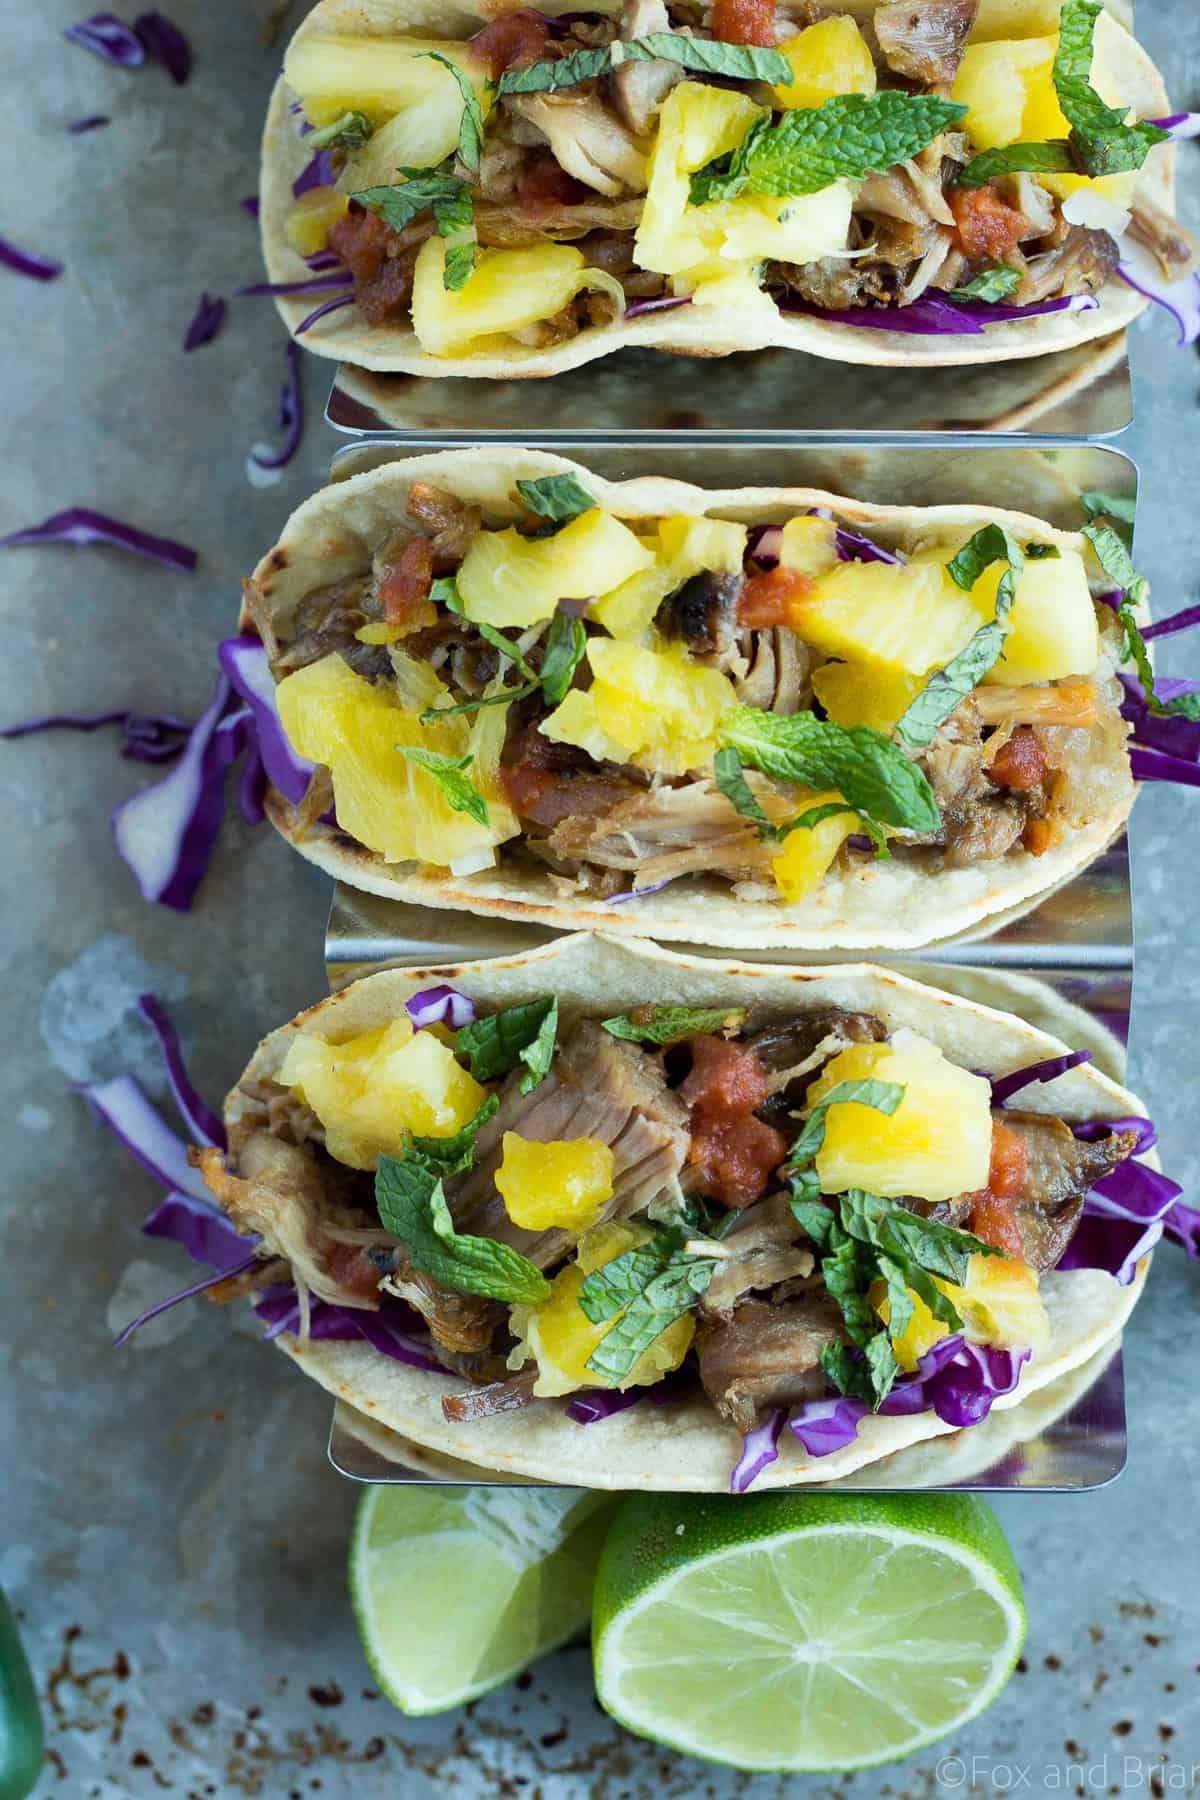 These Slow Cooker Pork Tacos let your slow cooker do most of the work. Crunchy purple cabbage, tender pork and a juicy pineapple mint salsa create a taco bursting with flavor!